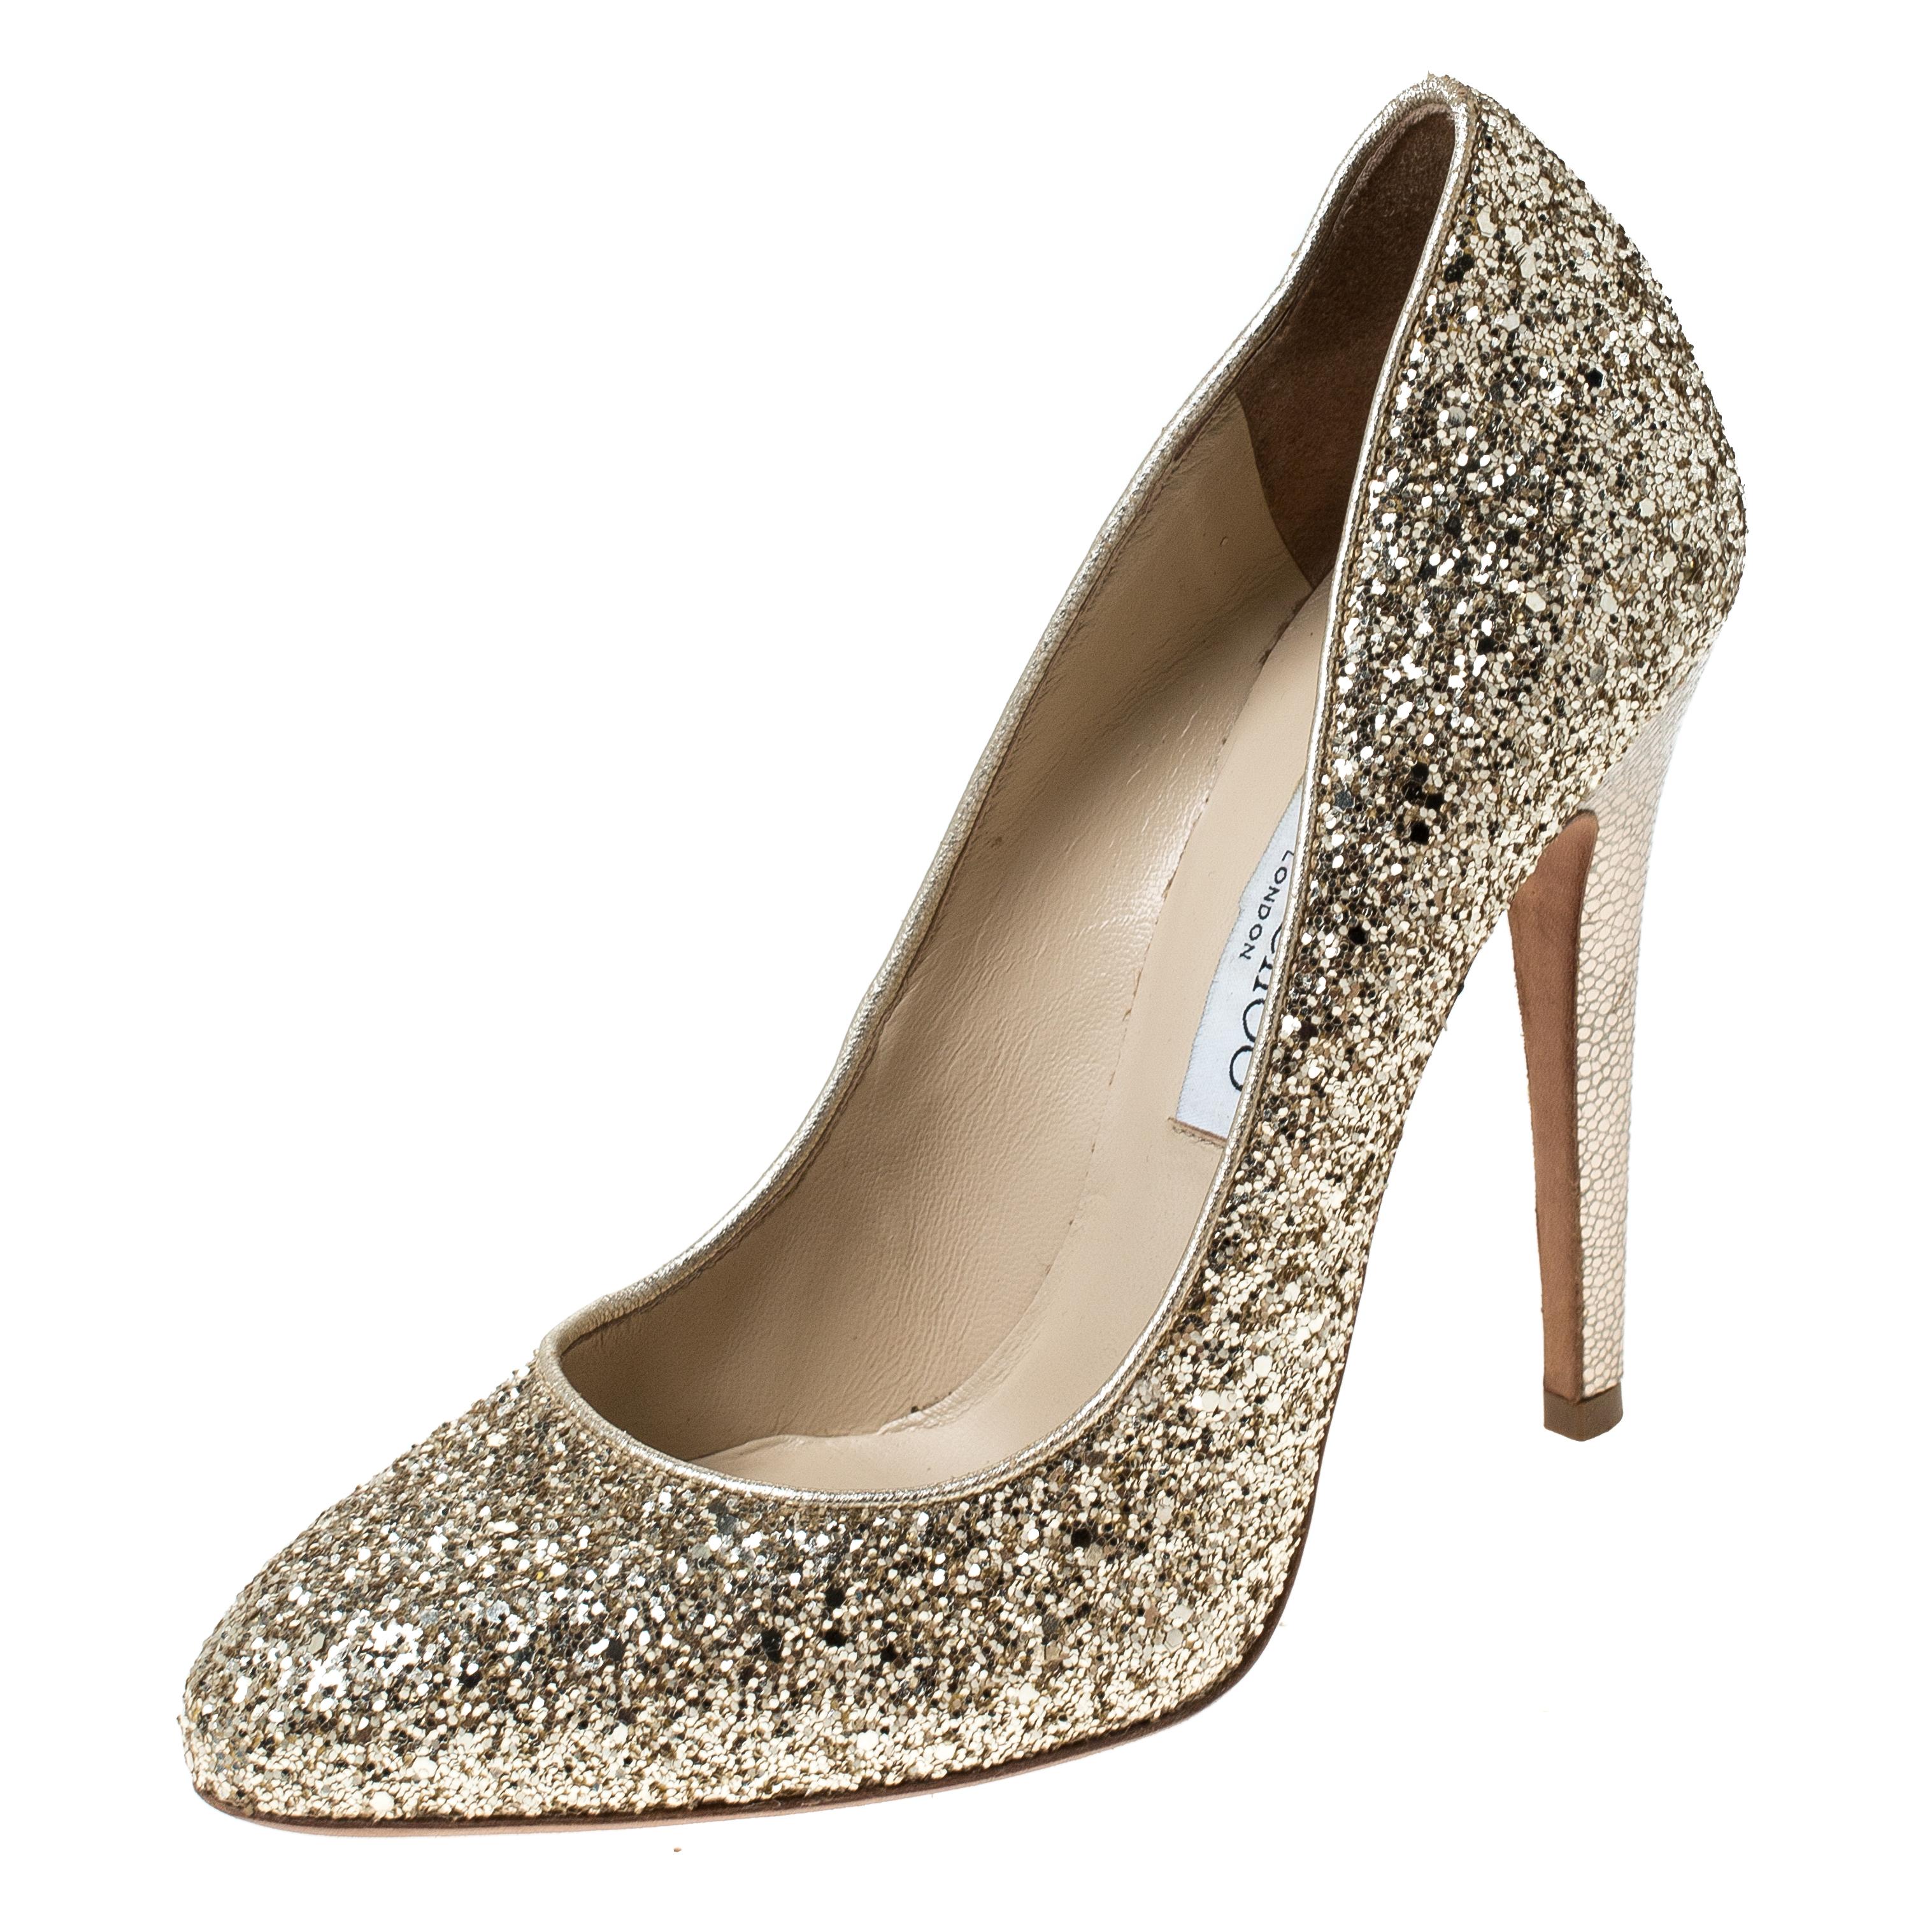 Elevate your style statement a notch higher with these Victoria pumps from Jimmy Choo! The metallic gold pumps are crafted from glitter and feature almond toes. They come equipped with comfortable leather-lined insoles and 12 cm high